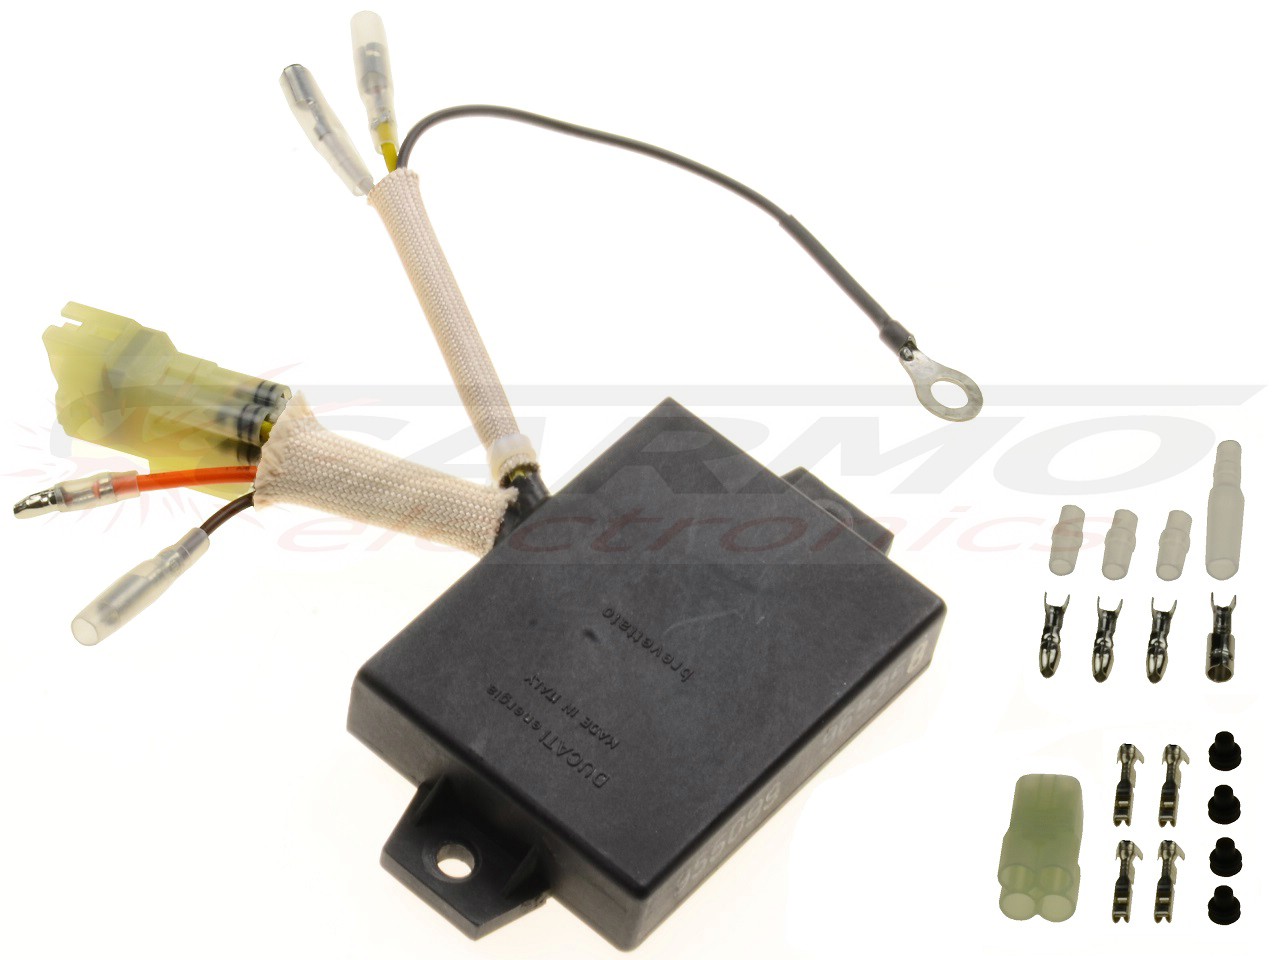 Rotax 912 CDI 965358 new wires, sleeves and connectors - Click Image to Close